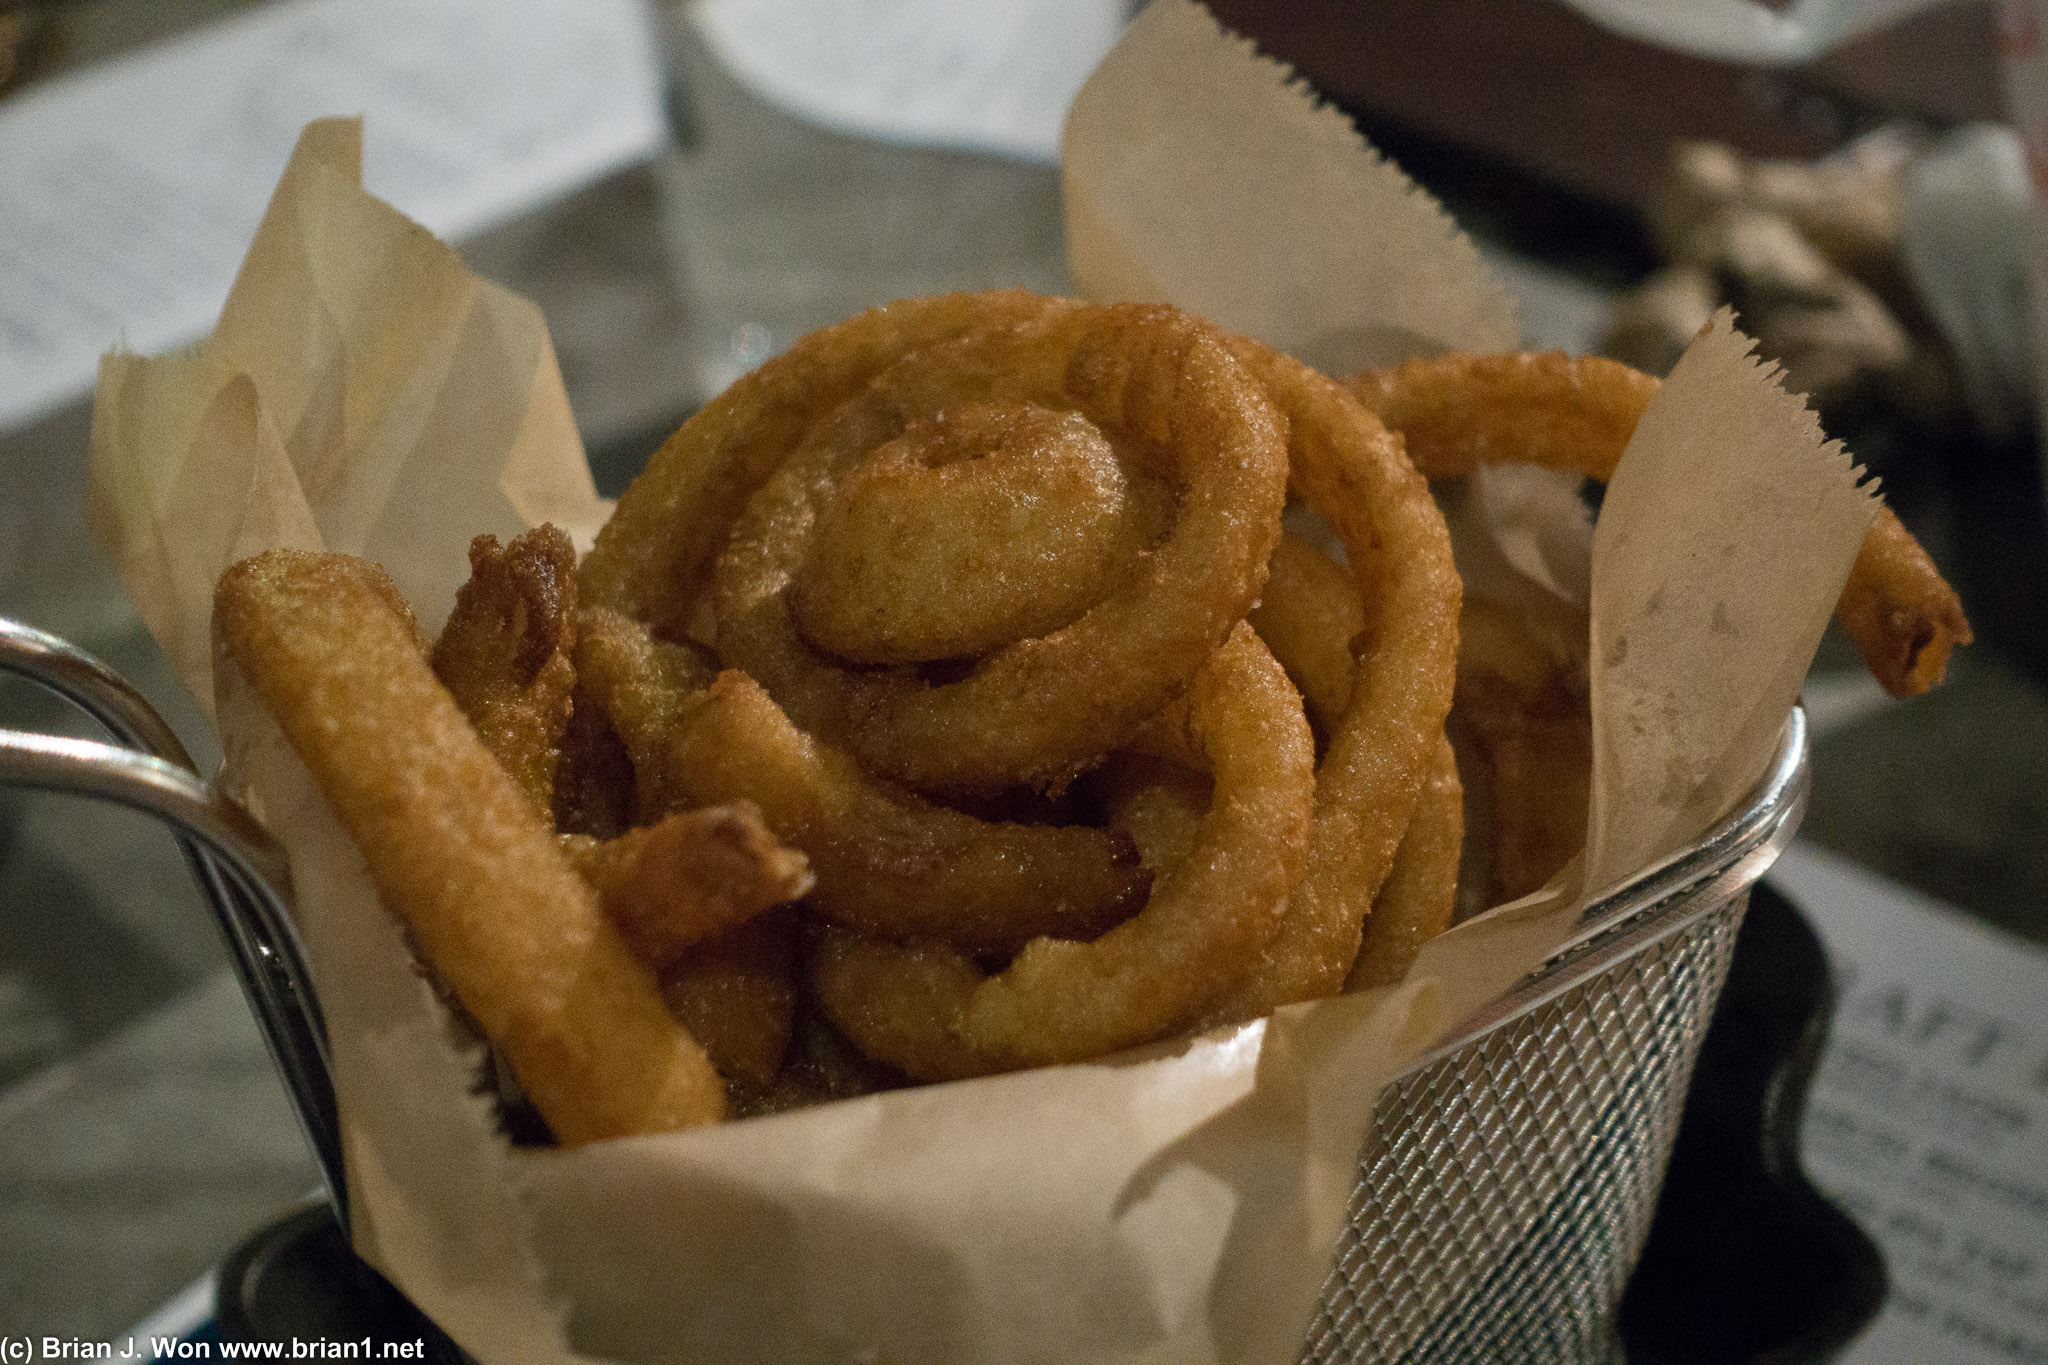 Saw another table order onion rings, couldn't resist.